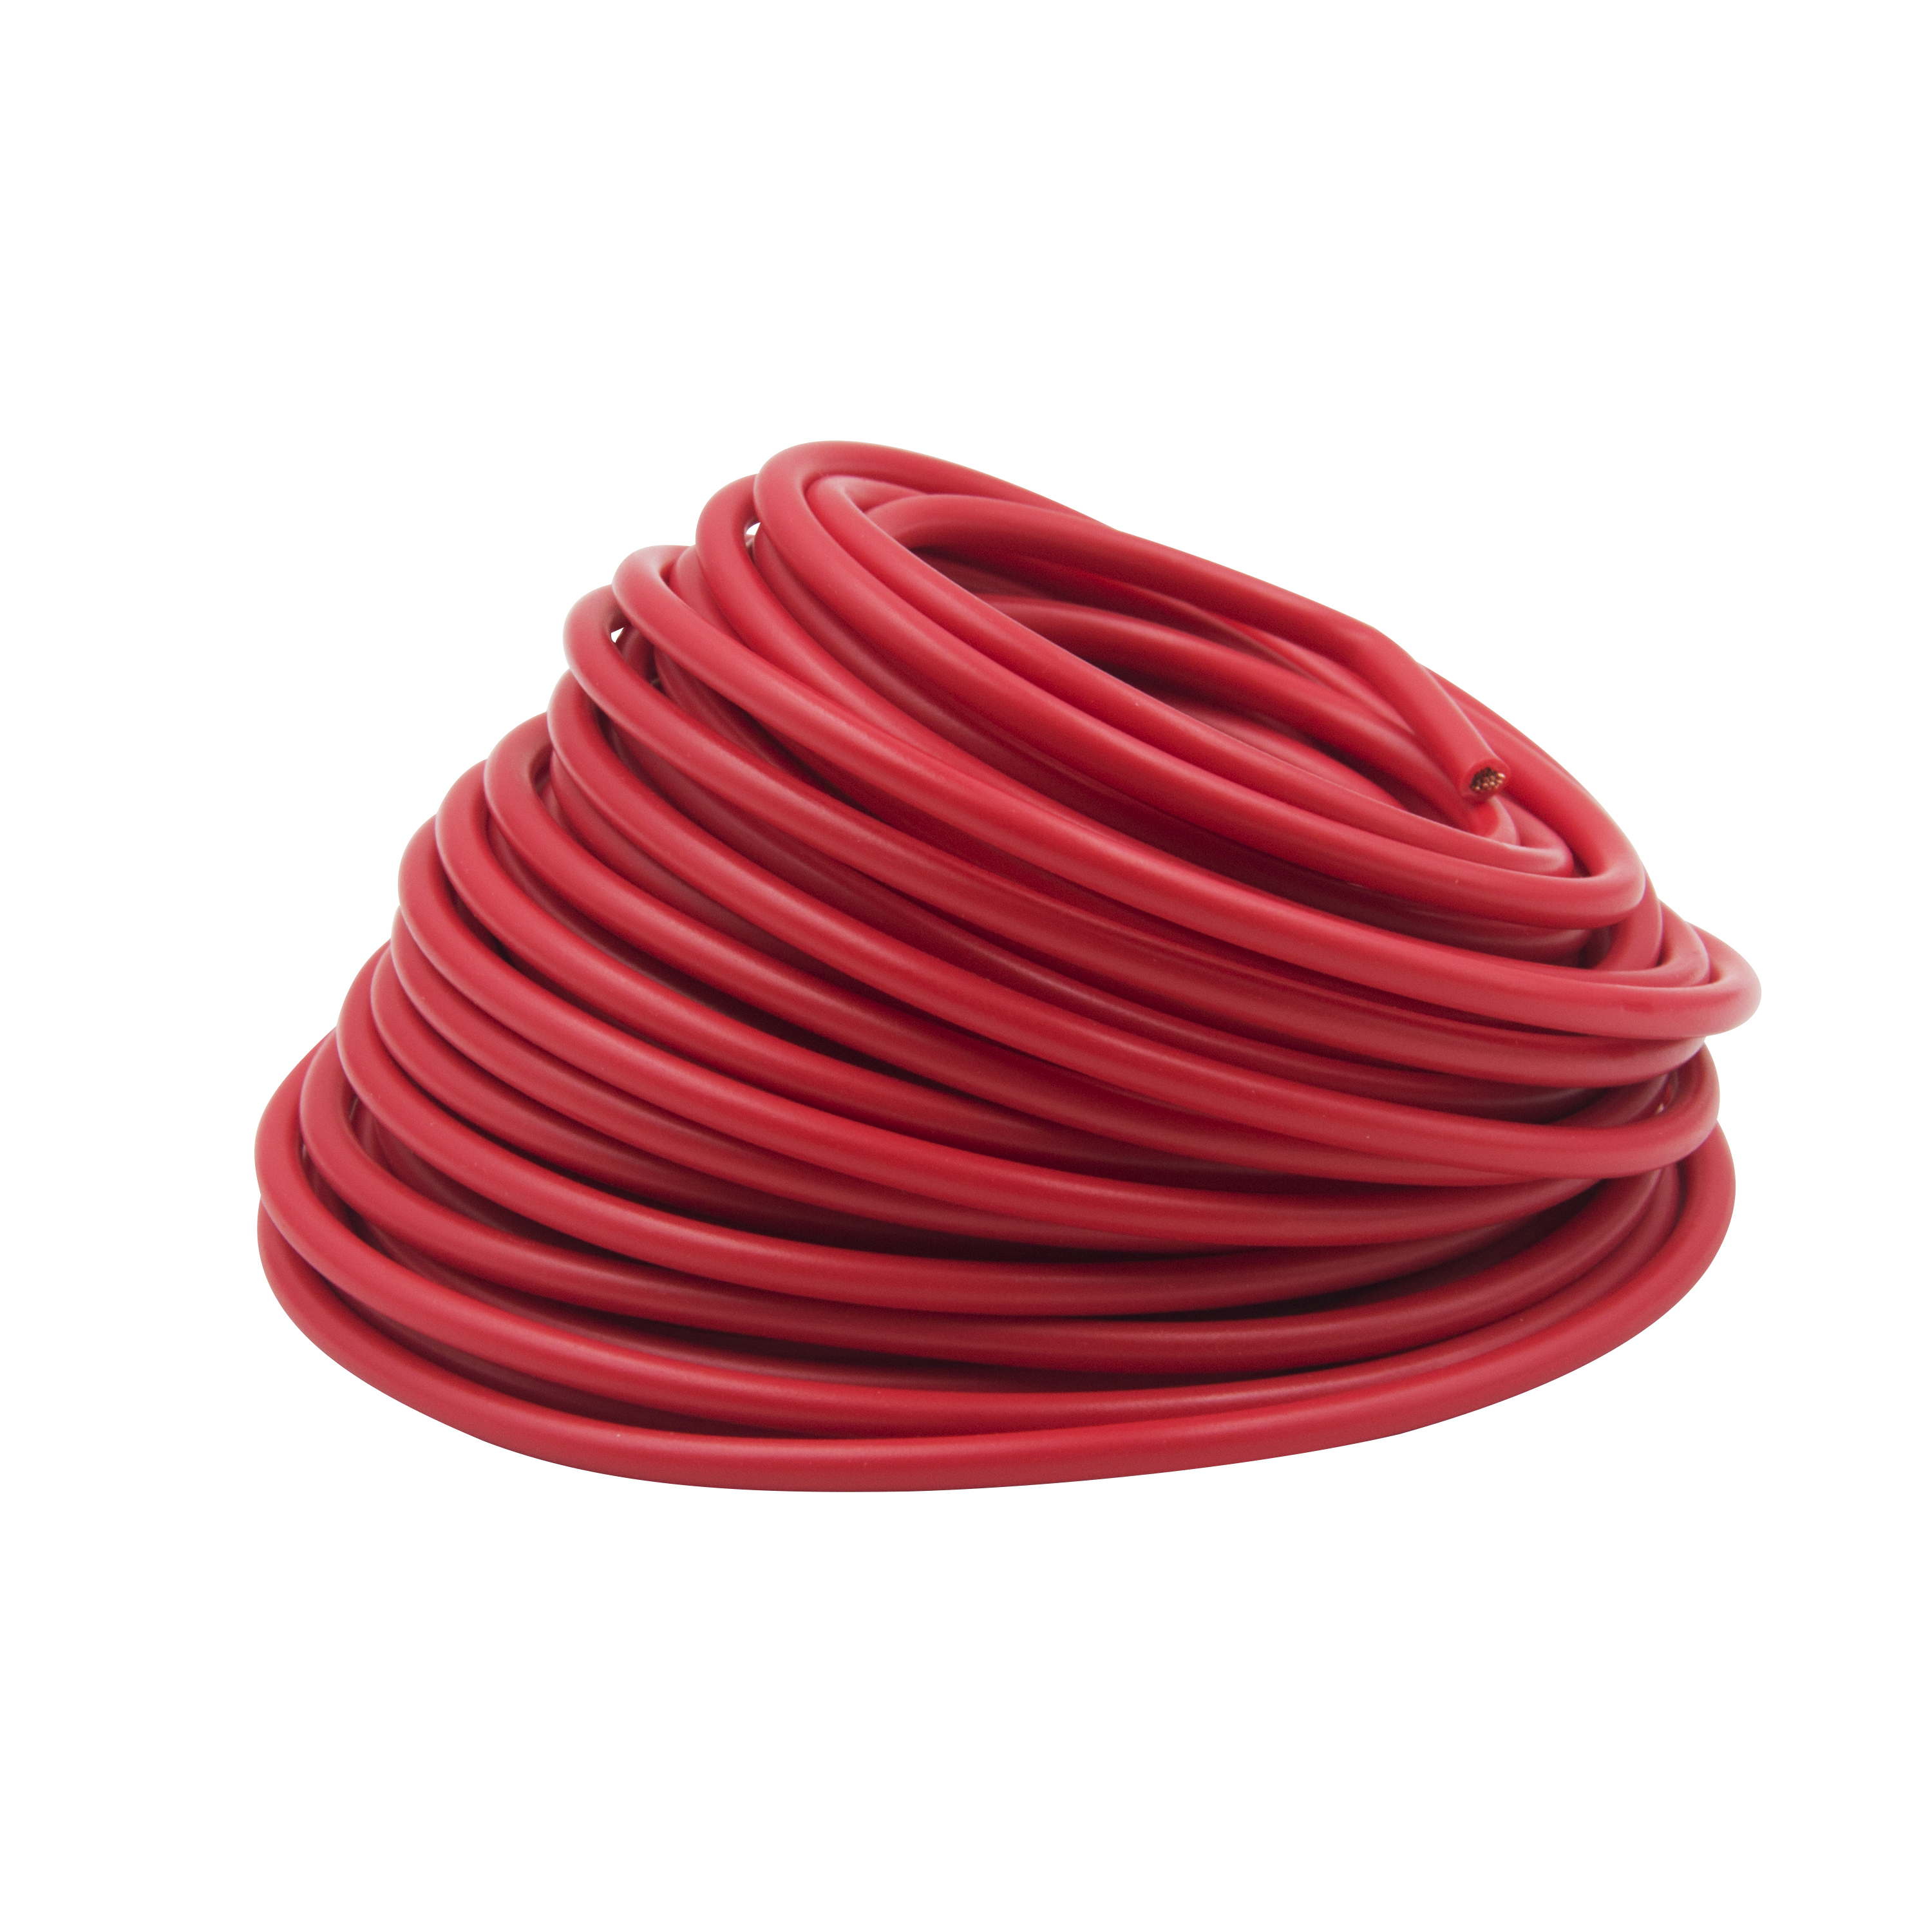 Everstart 30 Feet 16 Gauge Red Auto Wire Roll For Tail Lights, Coil Wire, Directional Signals, Gas Gauge, Heater Leads, Stop Signals, Home Light, Starter Relay, Instrument Lamps, Parking Lights - image 4 of 8